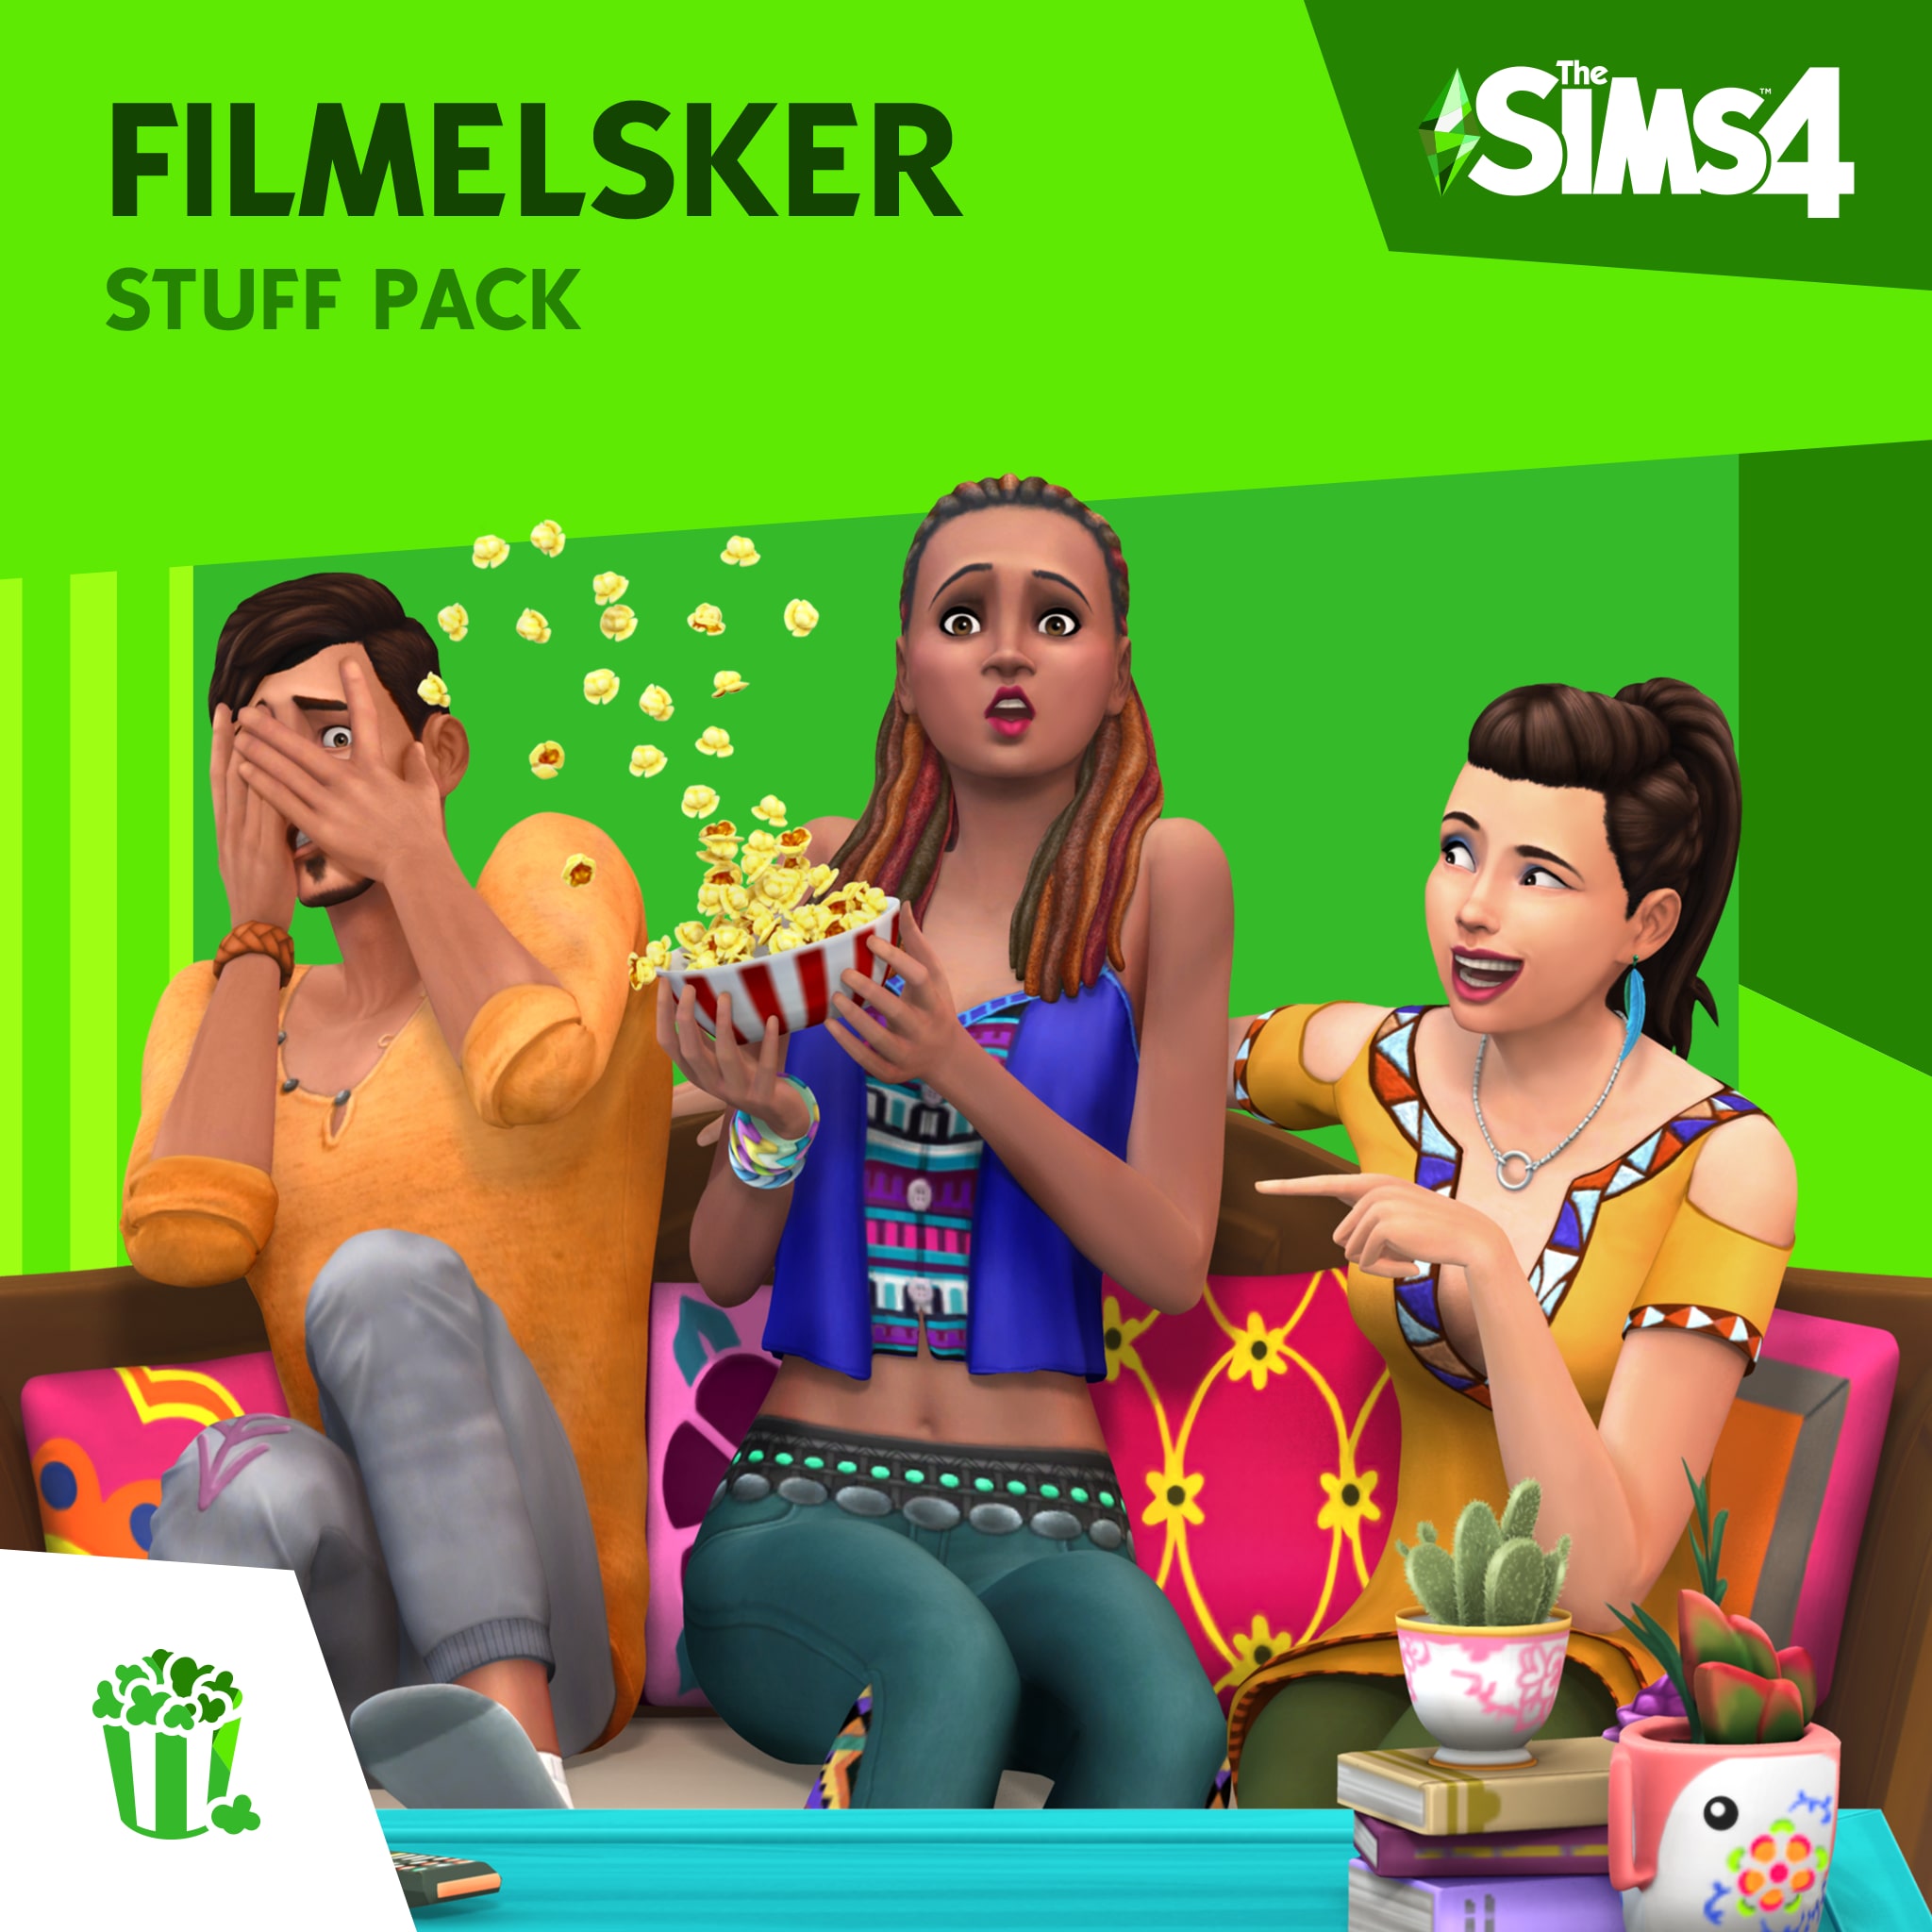 The Sims™ 4 Filmelskerindhold